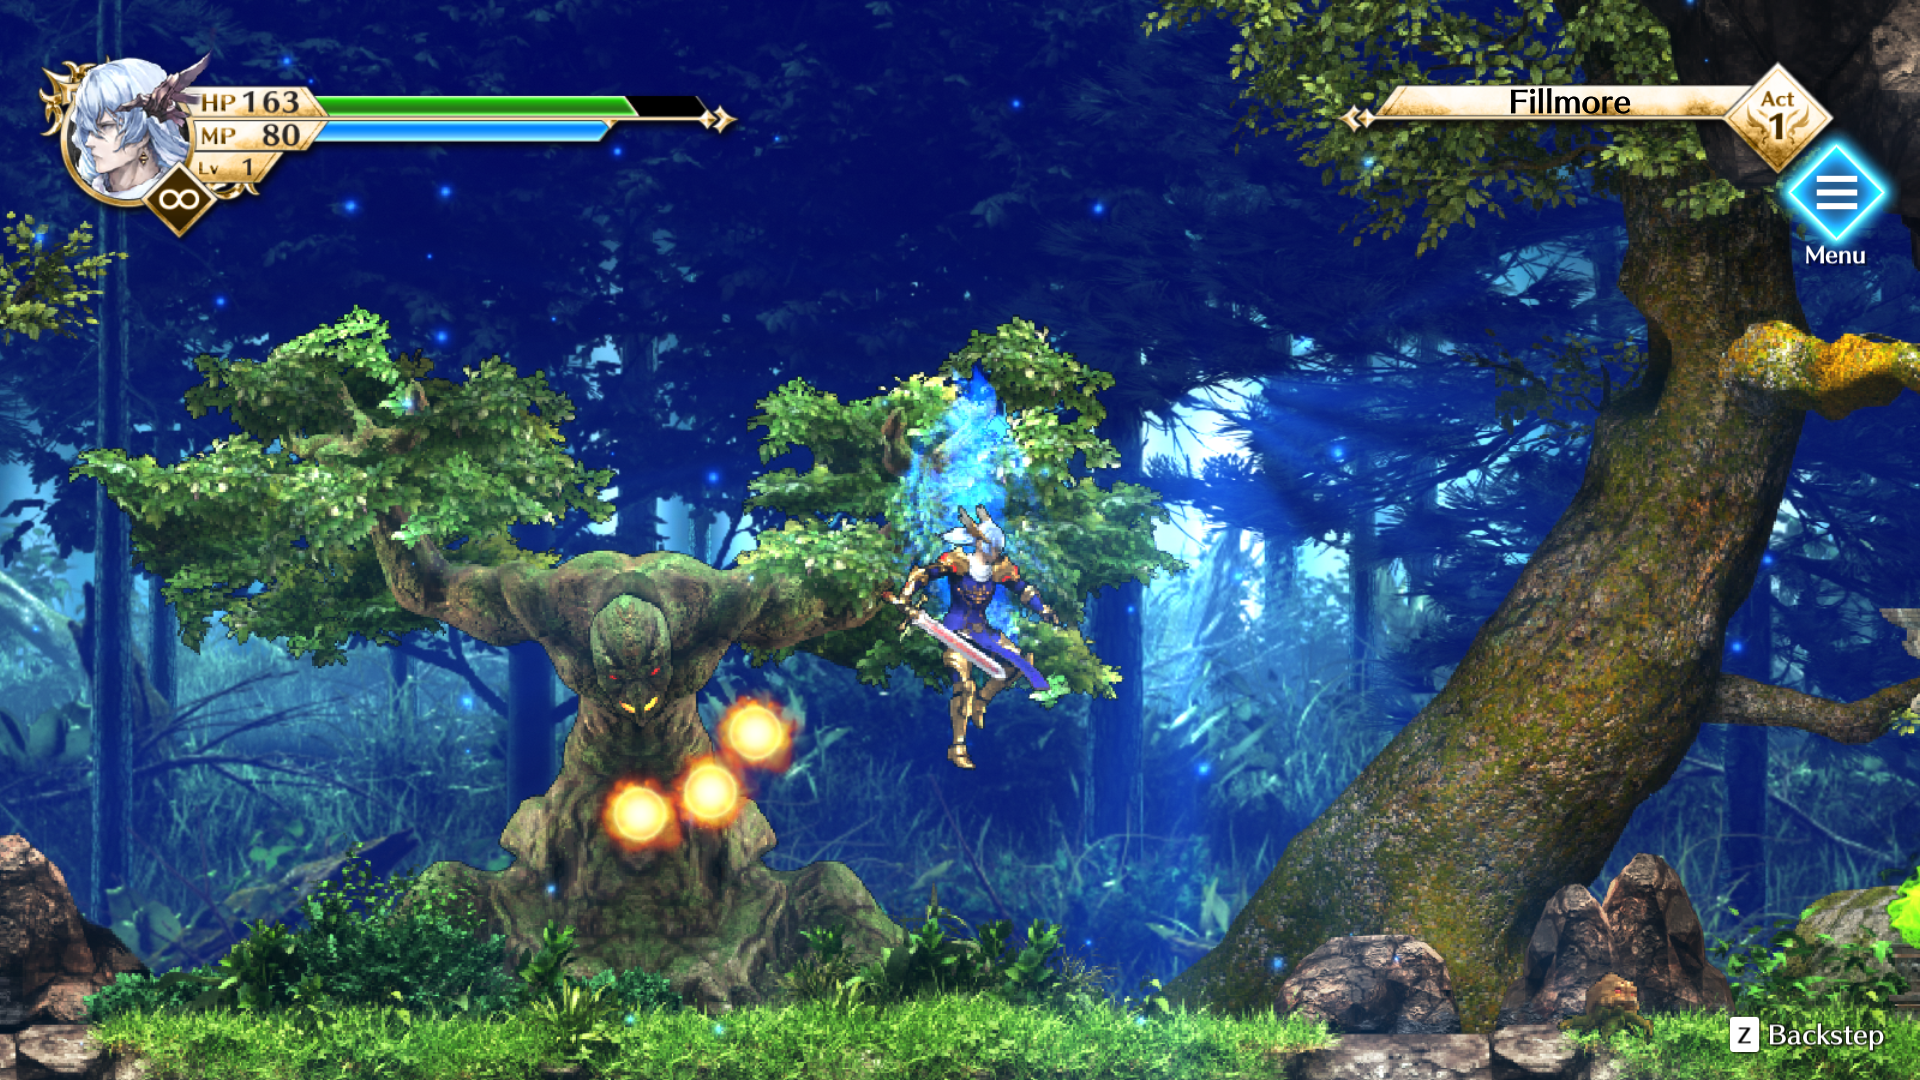 Gameplay screenshot of the Actraiser Renaissance protagonist in a battle against an enemy.